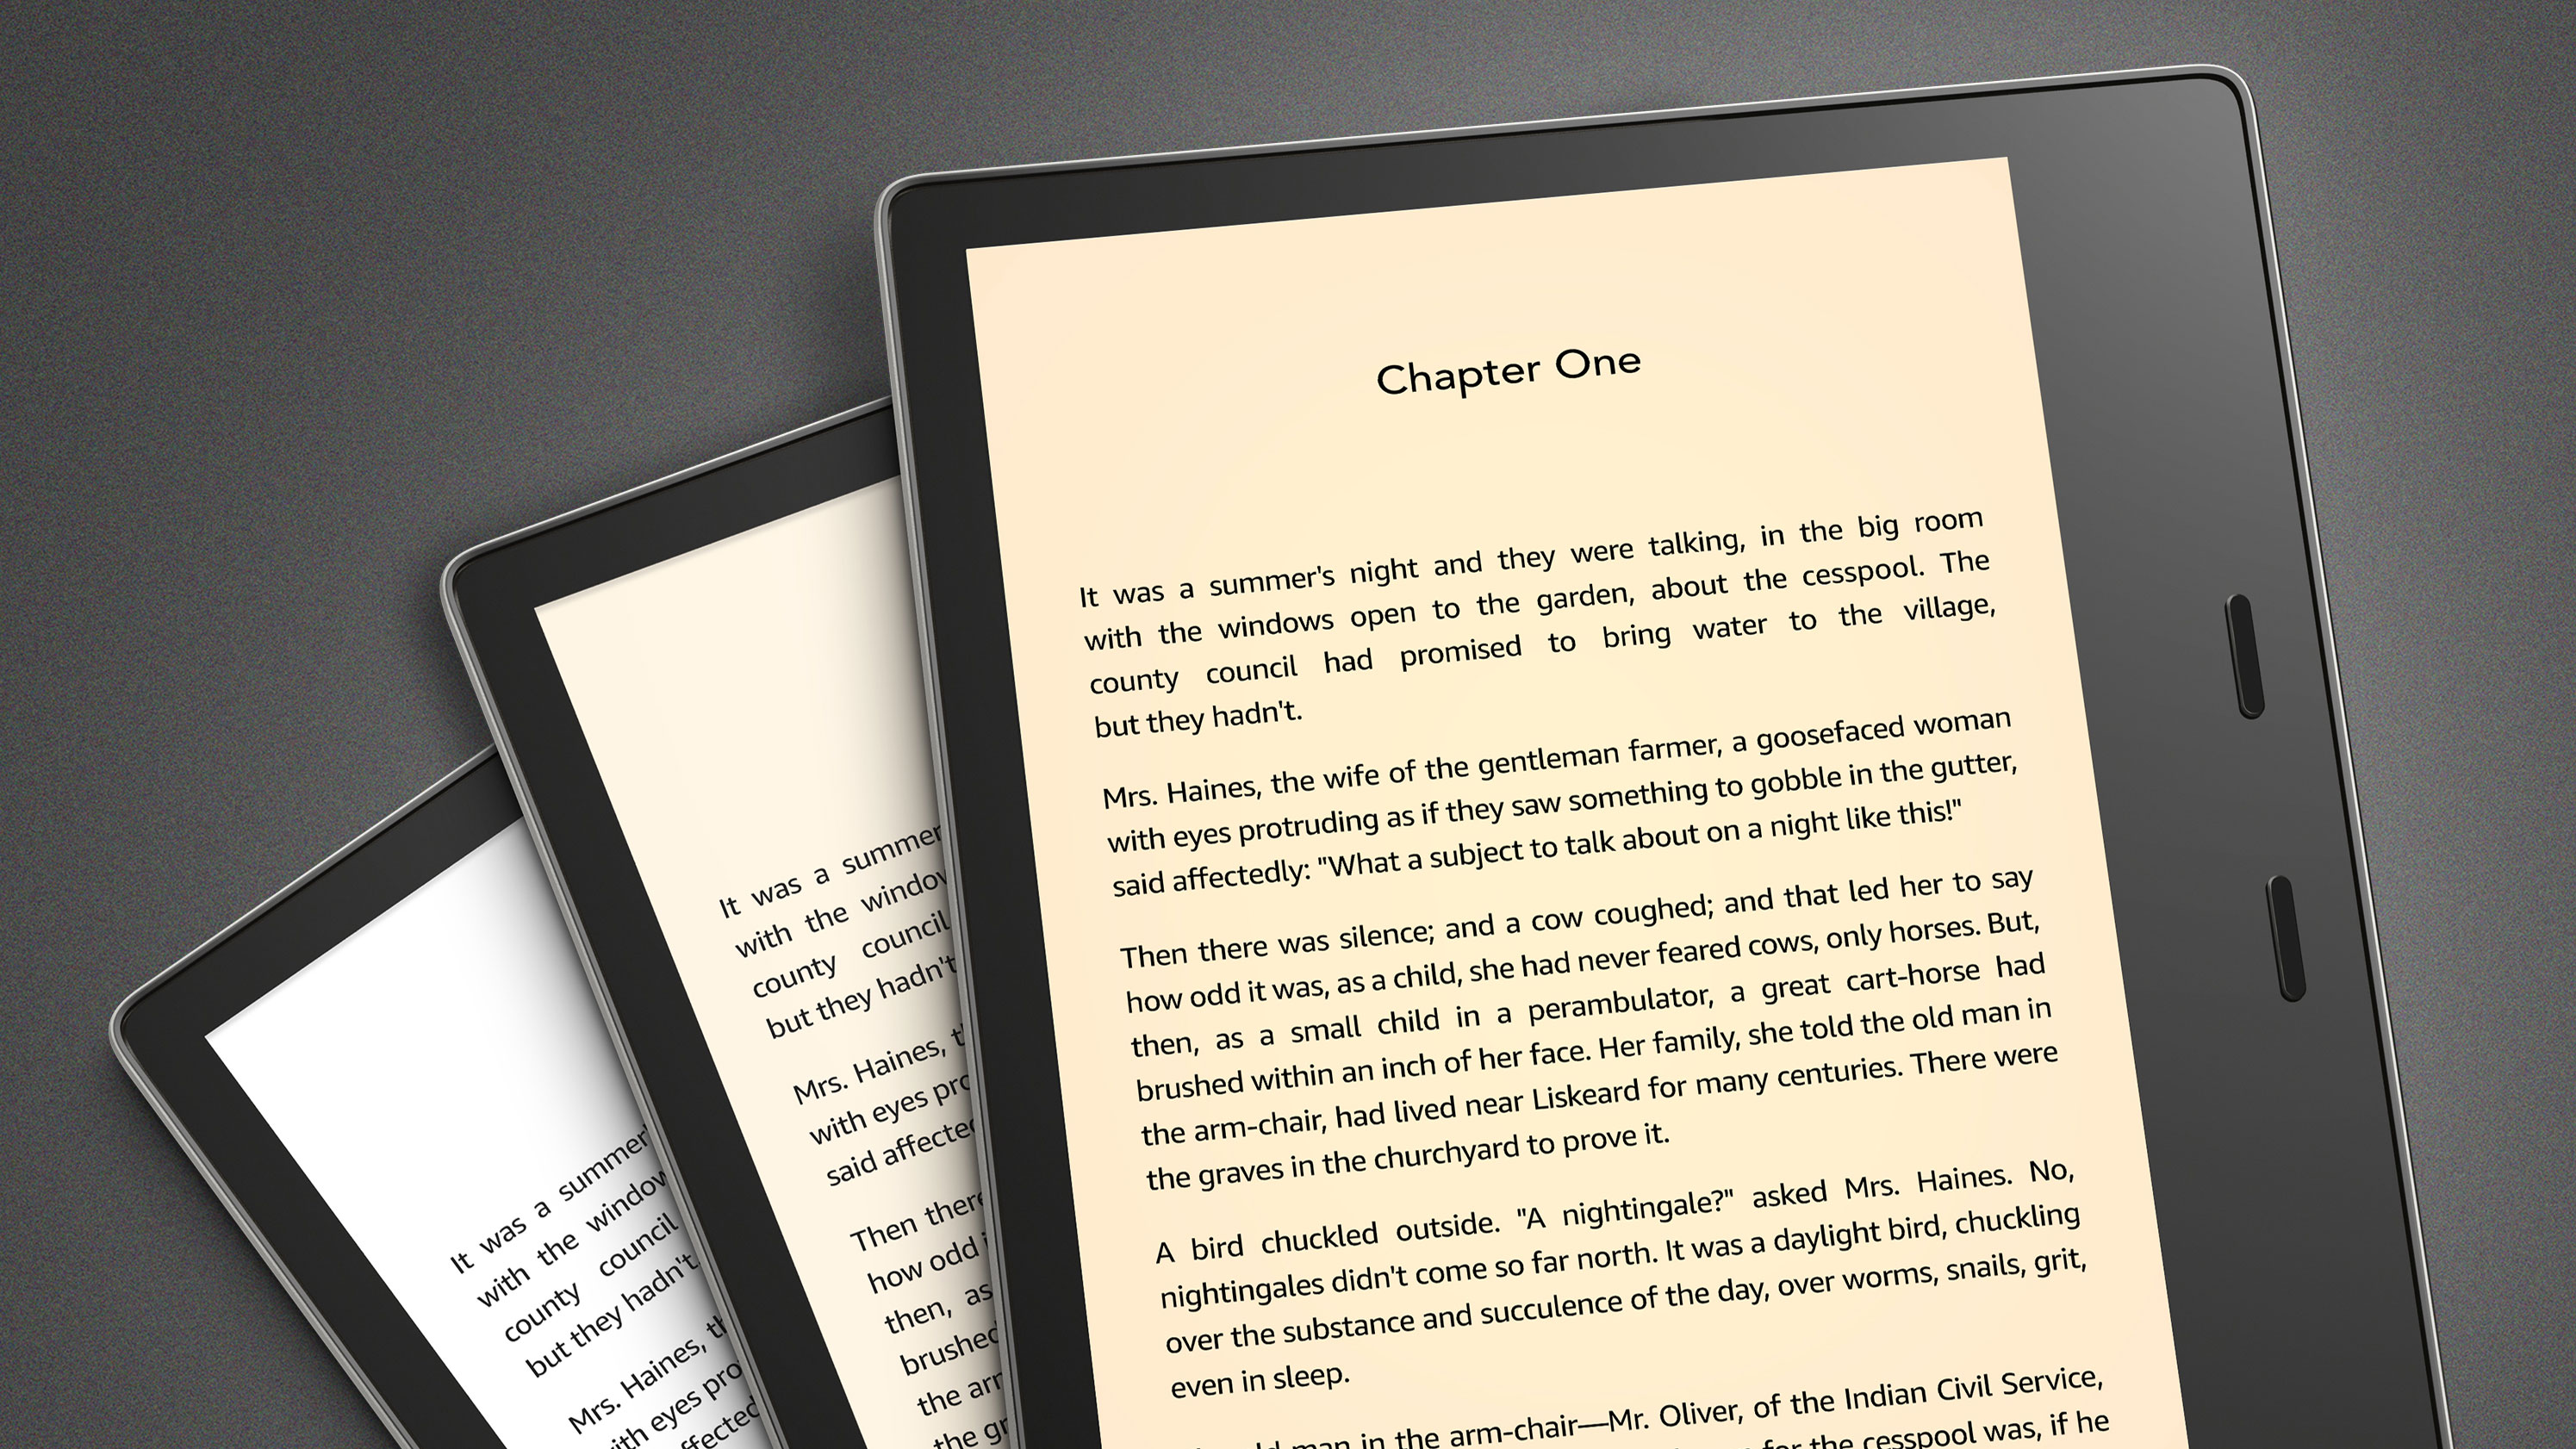 New Kindle Oasis comes with a warm light, but not much more has changed